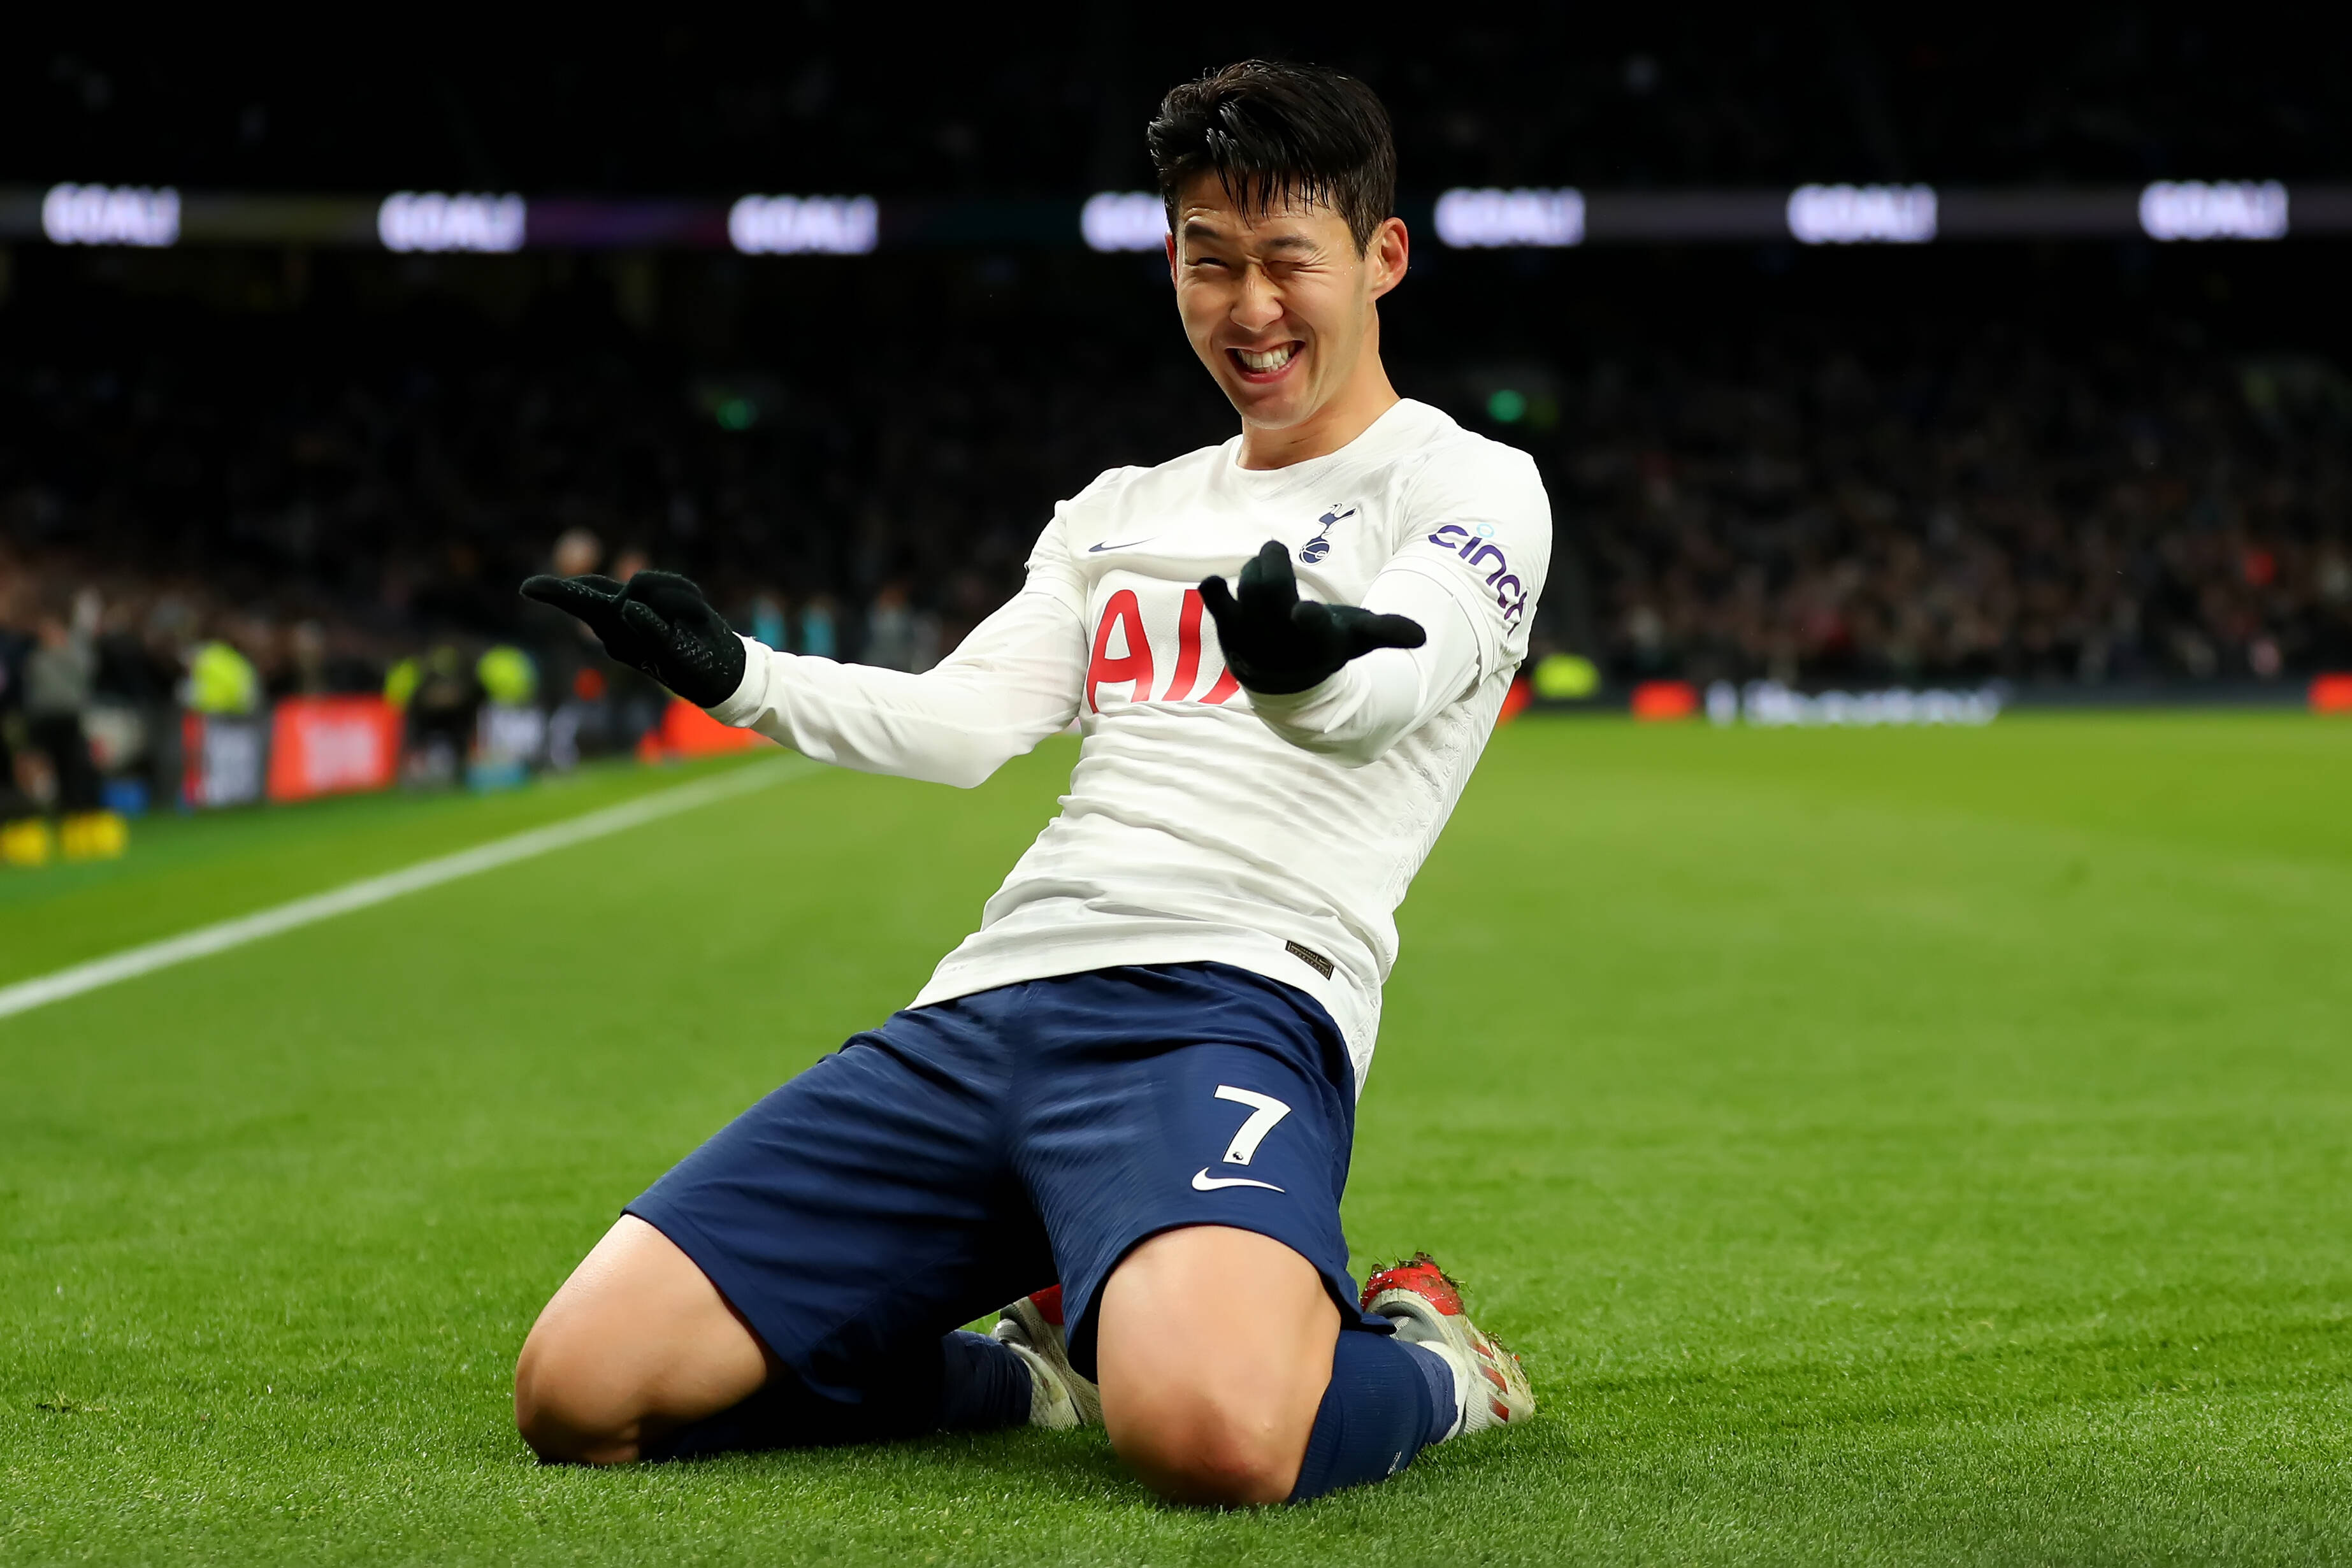 Son Heung-min pictured celebrating after scoring for Tottenham in a 3-0 win over Norwich in December 2021